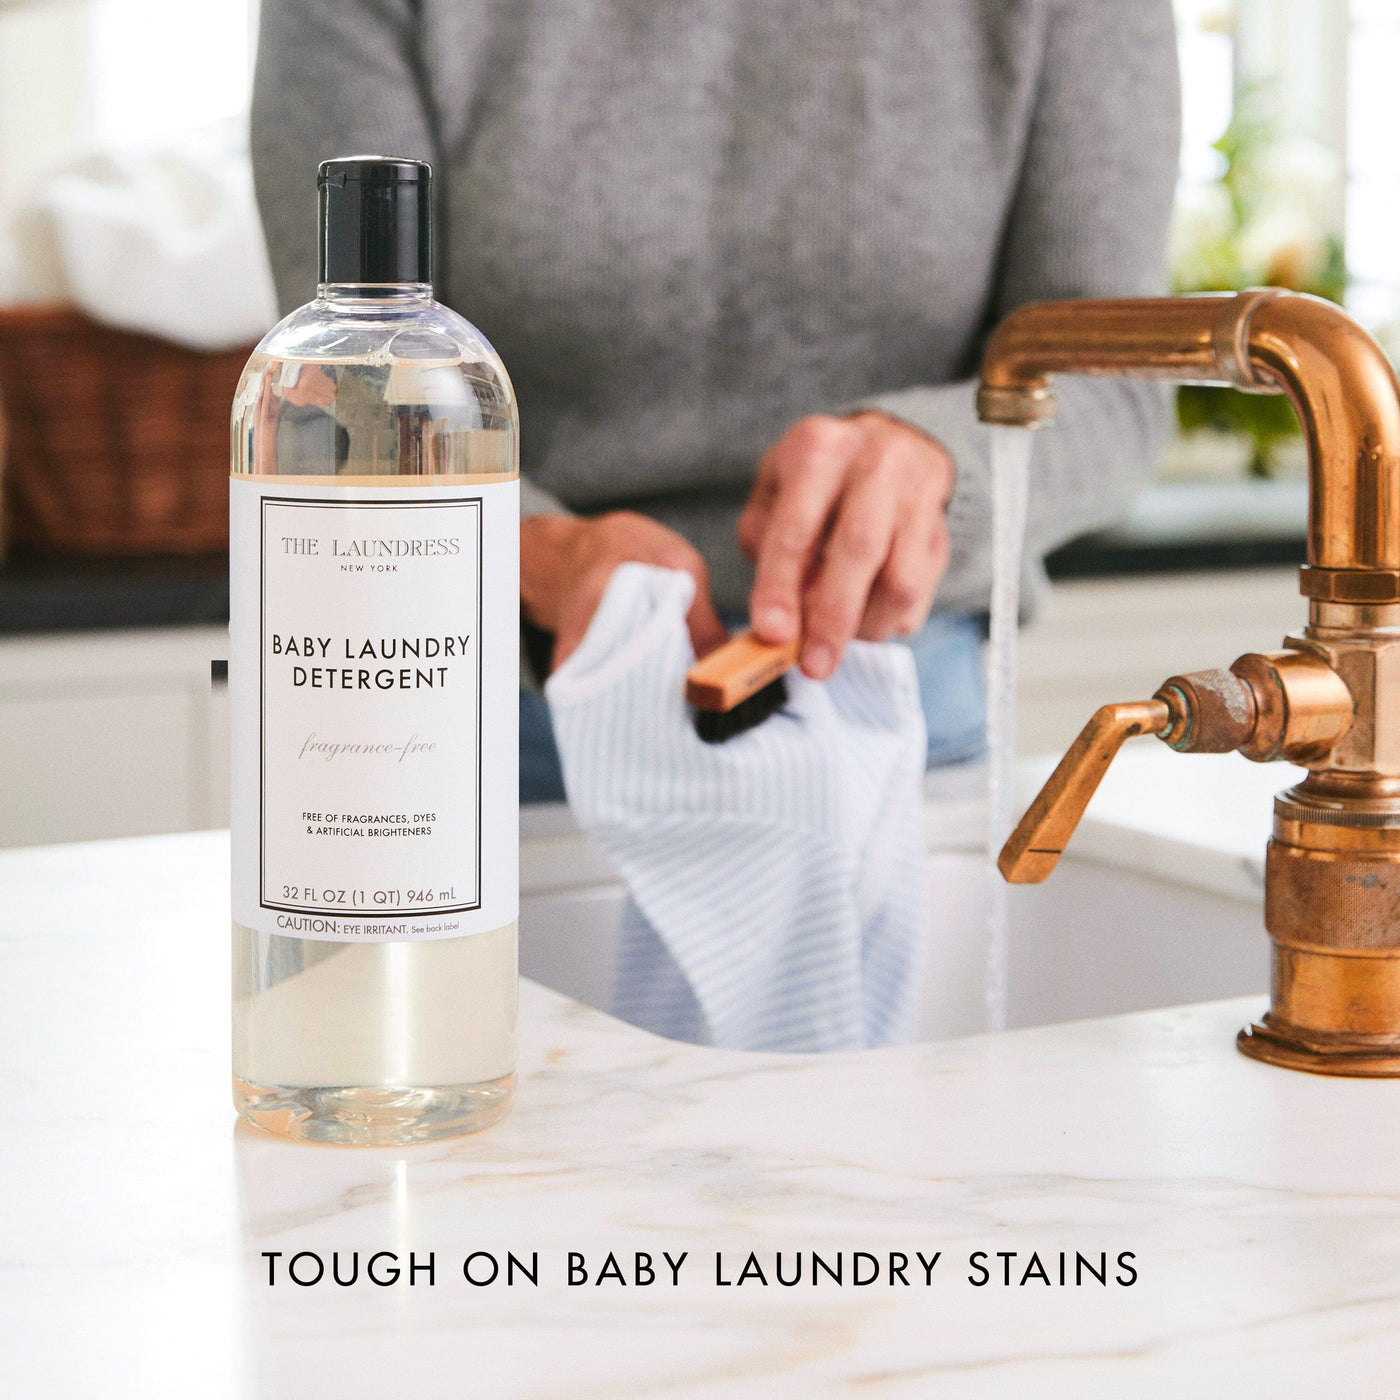 Fragrance-Free Baby Laundry Detergent Household Supplies The Laundress